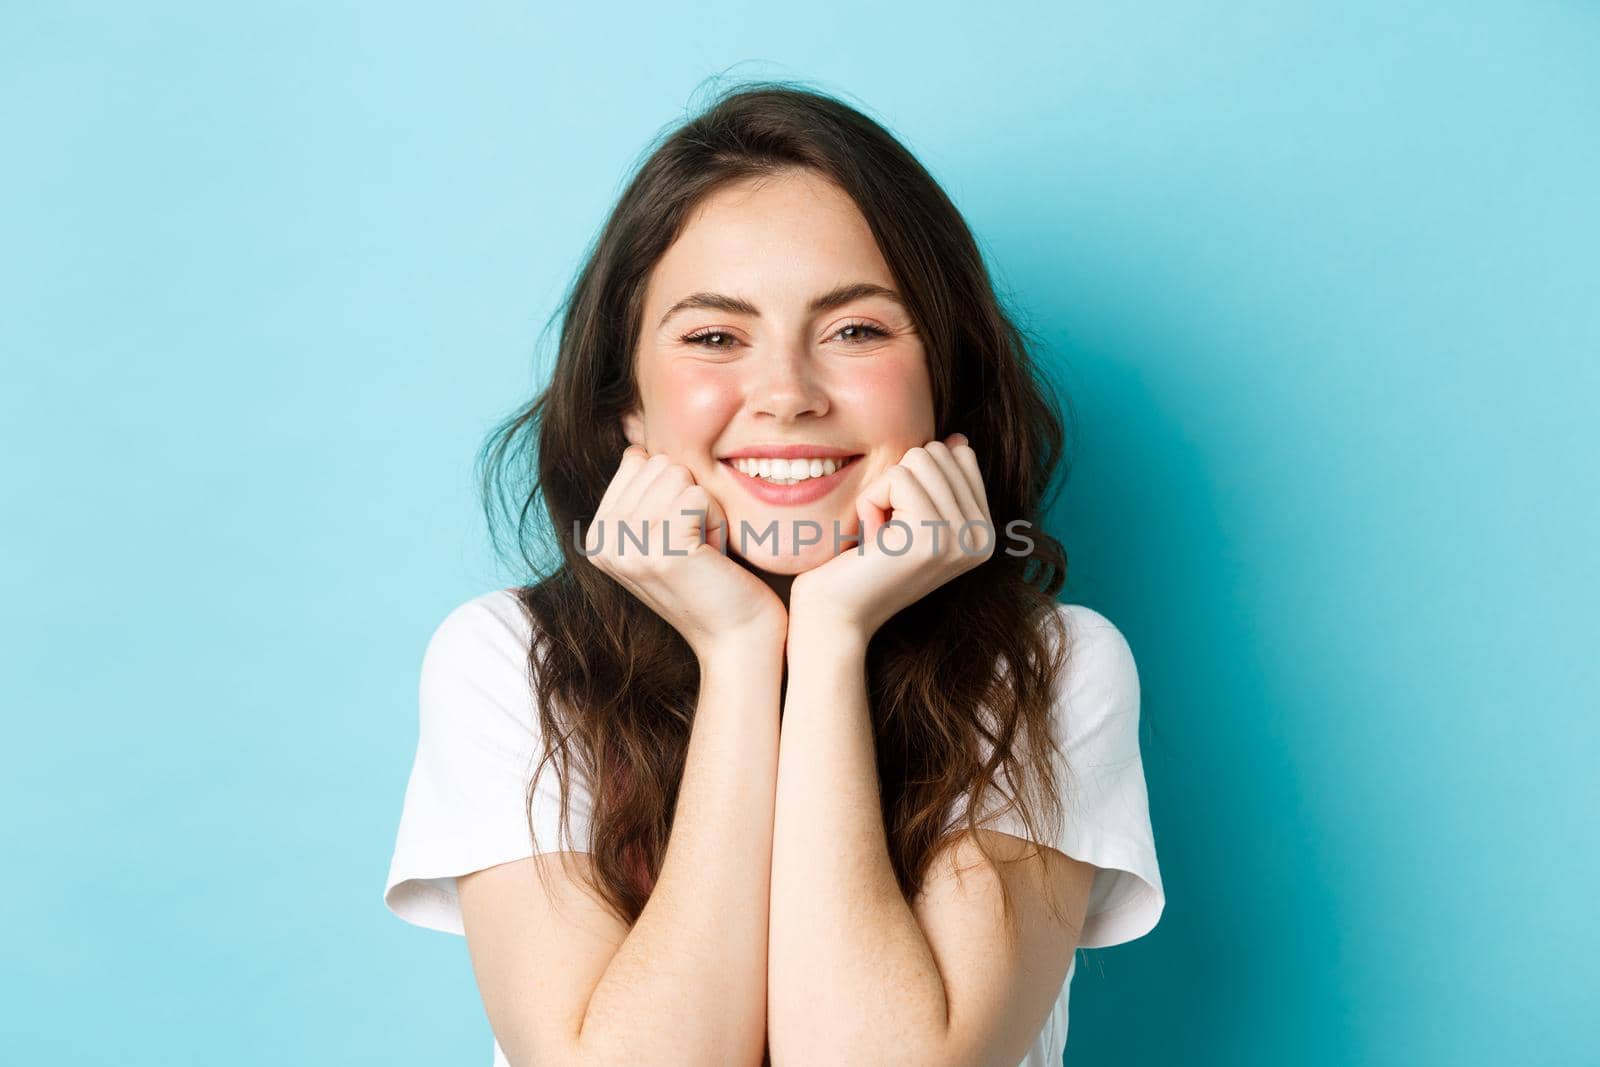 Close up portrait of cheerful woman smiling with teeth, lean face on hands and admiring something, looking with delight, standing happy against blue background.